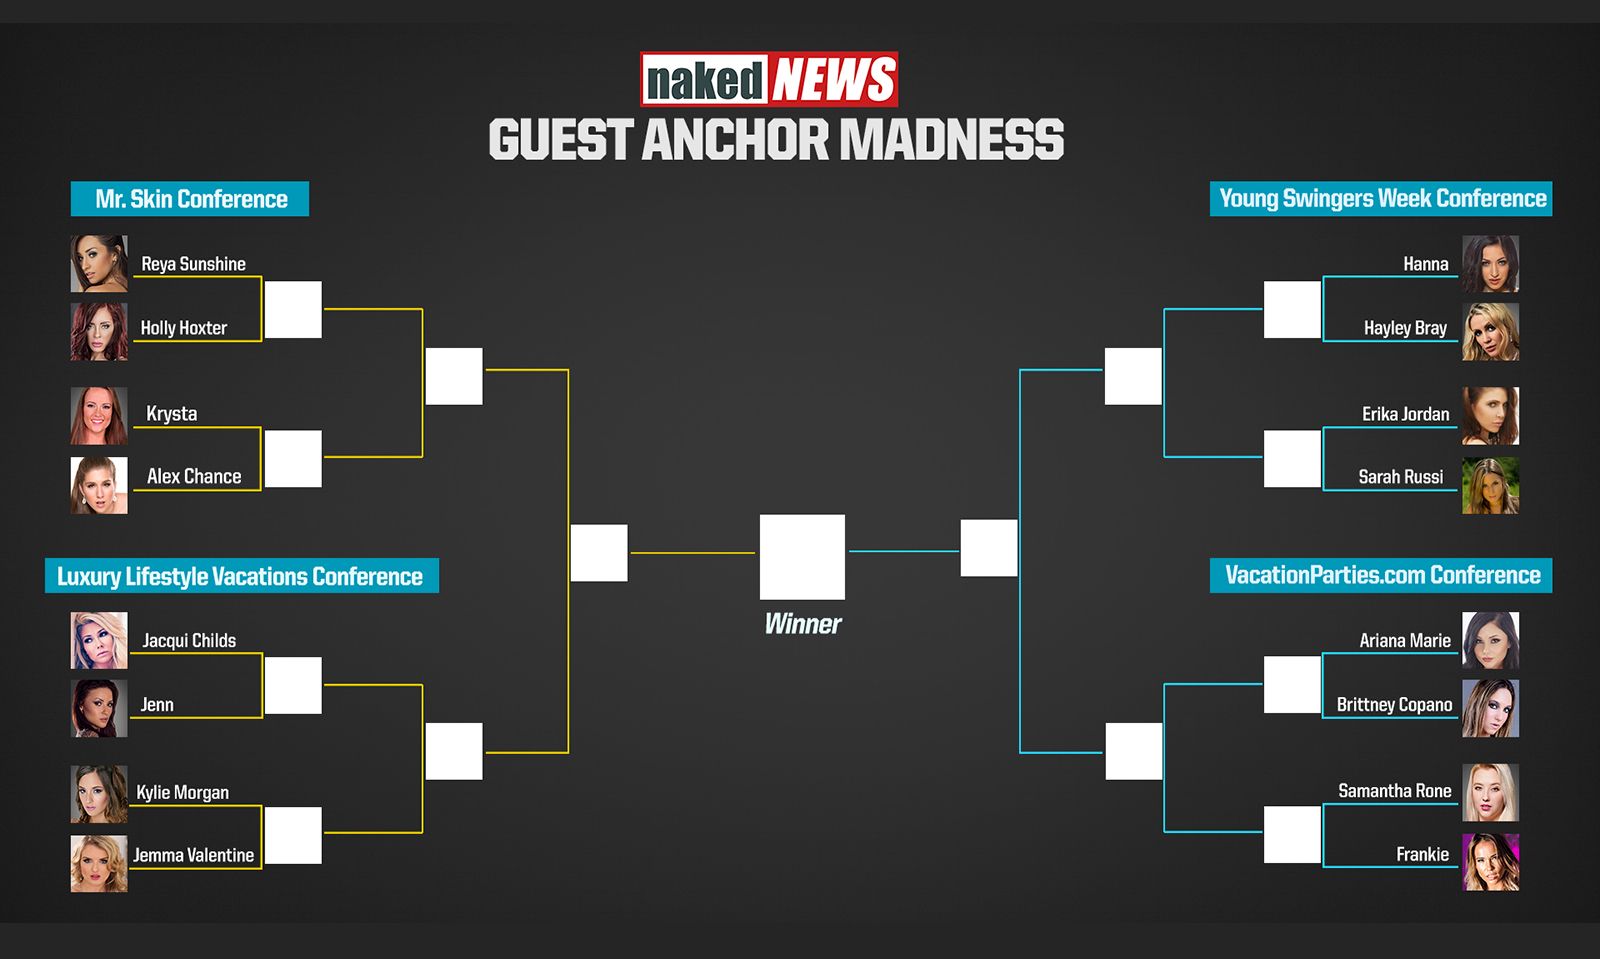 Naked News Opens Up Voting for ‘Guest Anchor Madness’ Tournament